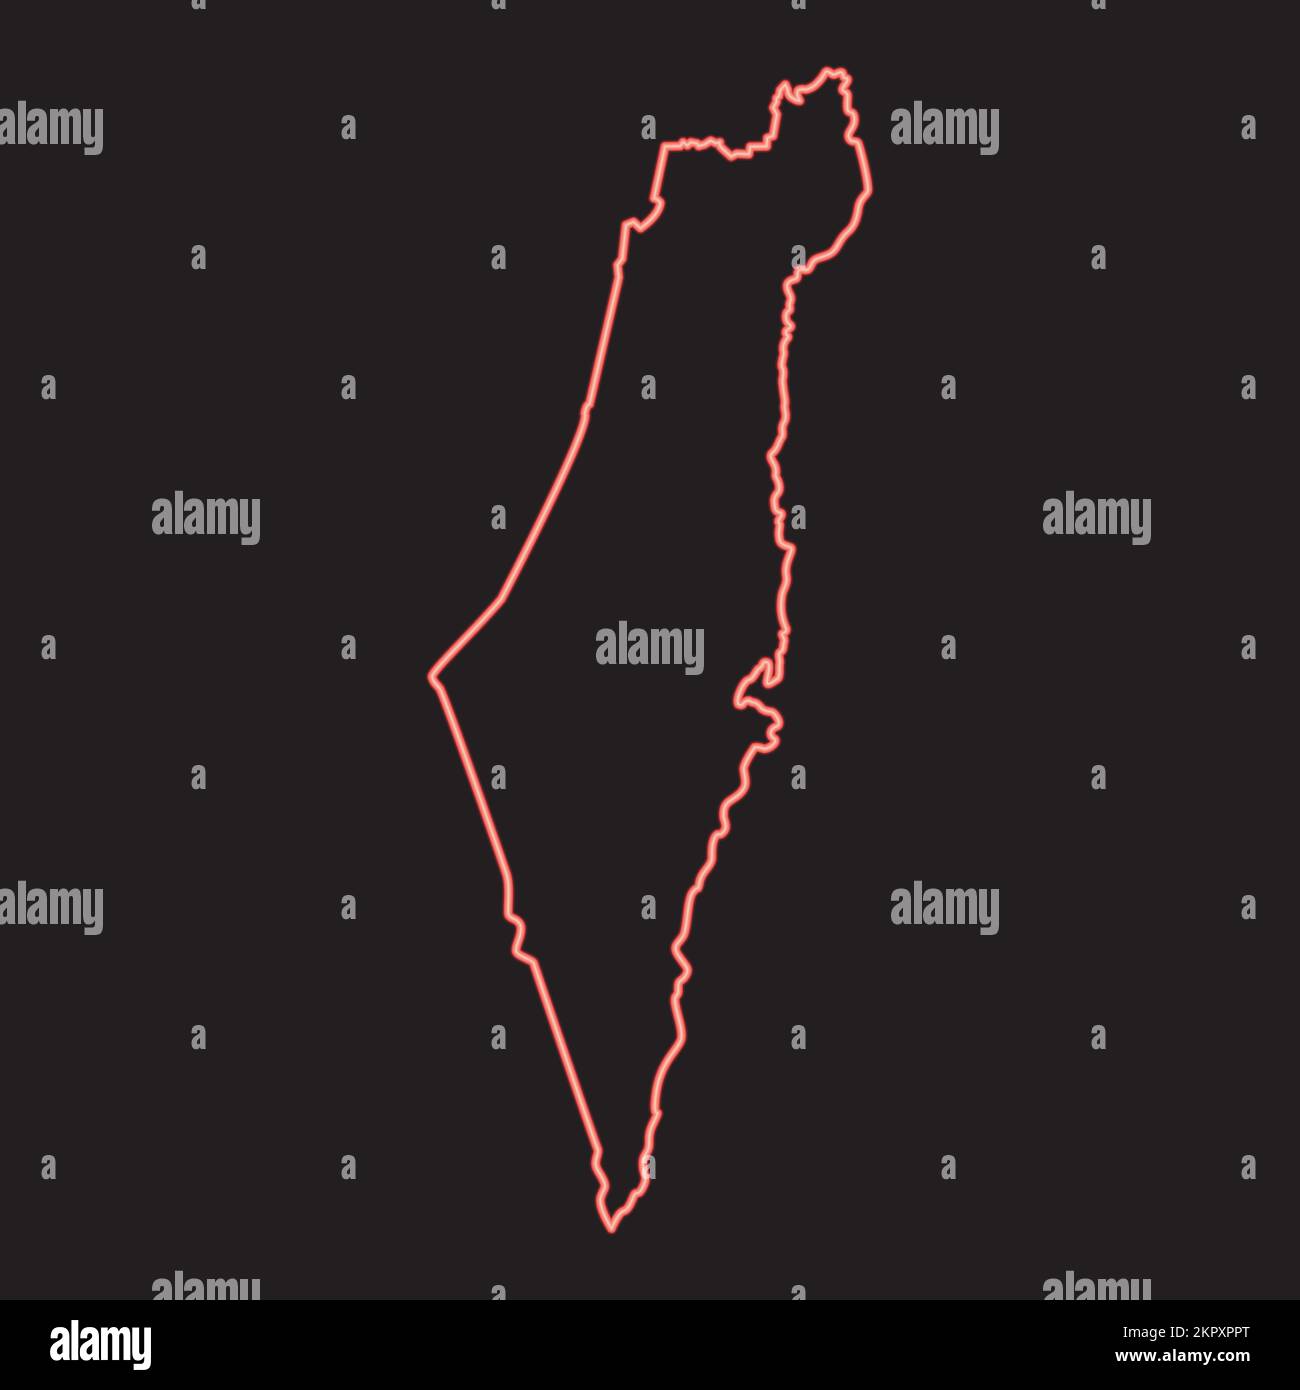 Neon map of israel red color vector illustration image flat style light Stock Vector